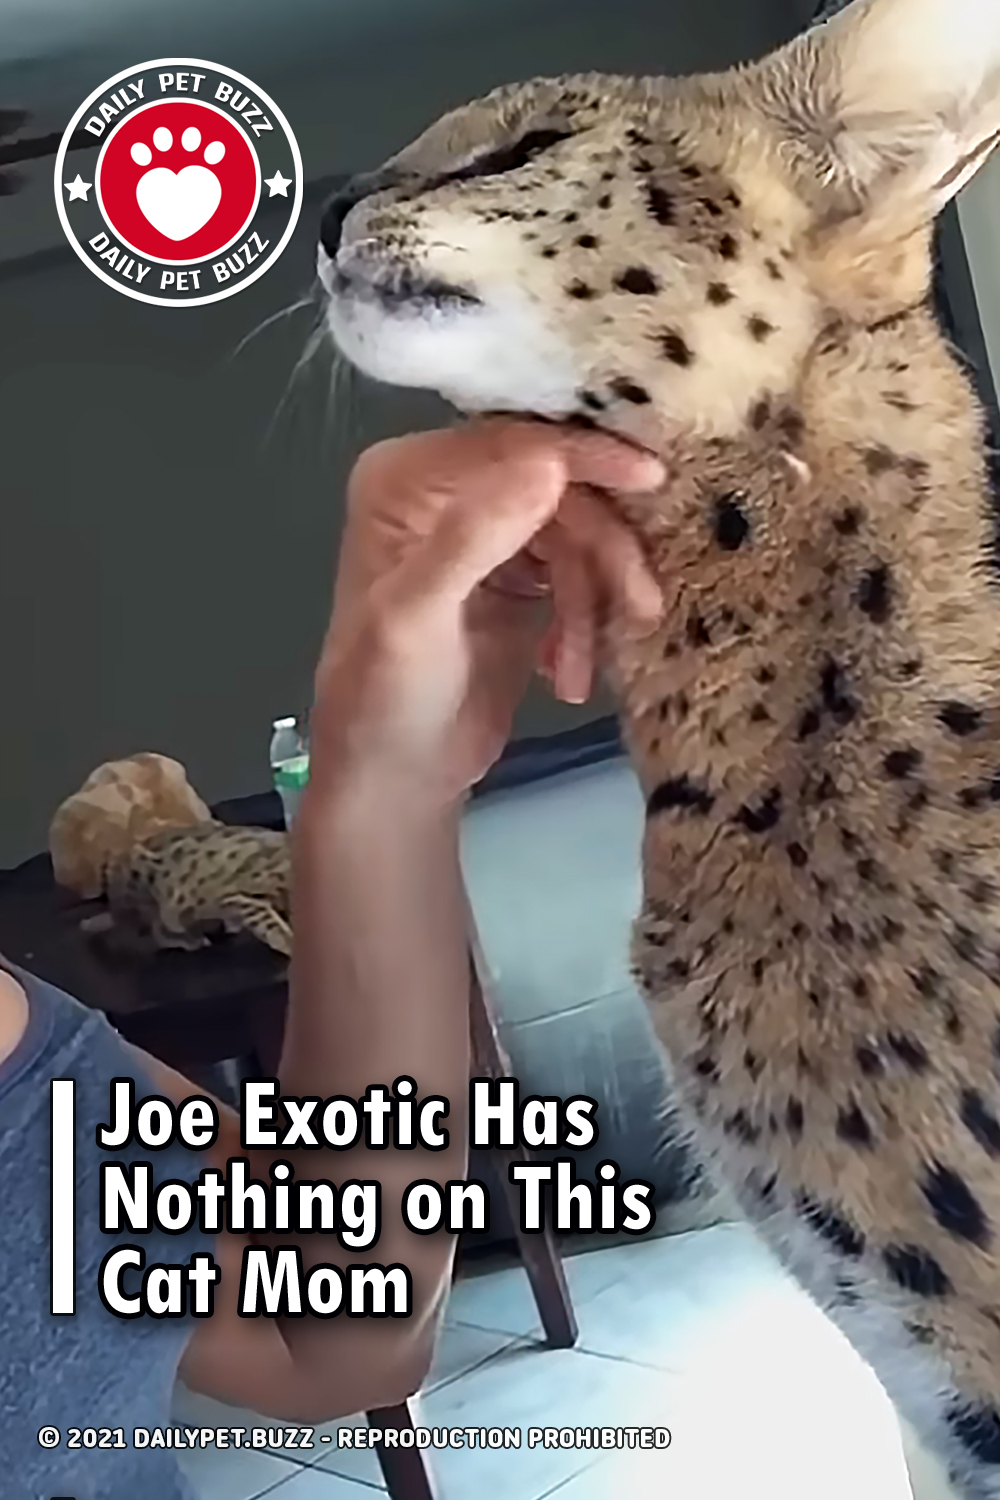 Joe Exotic Has Nothing on This Cat Mom